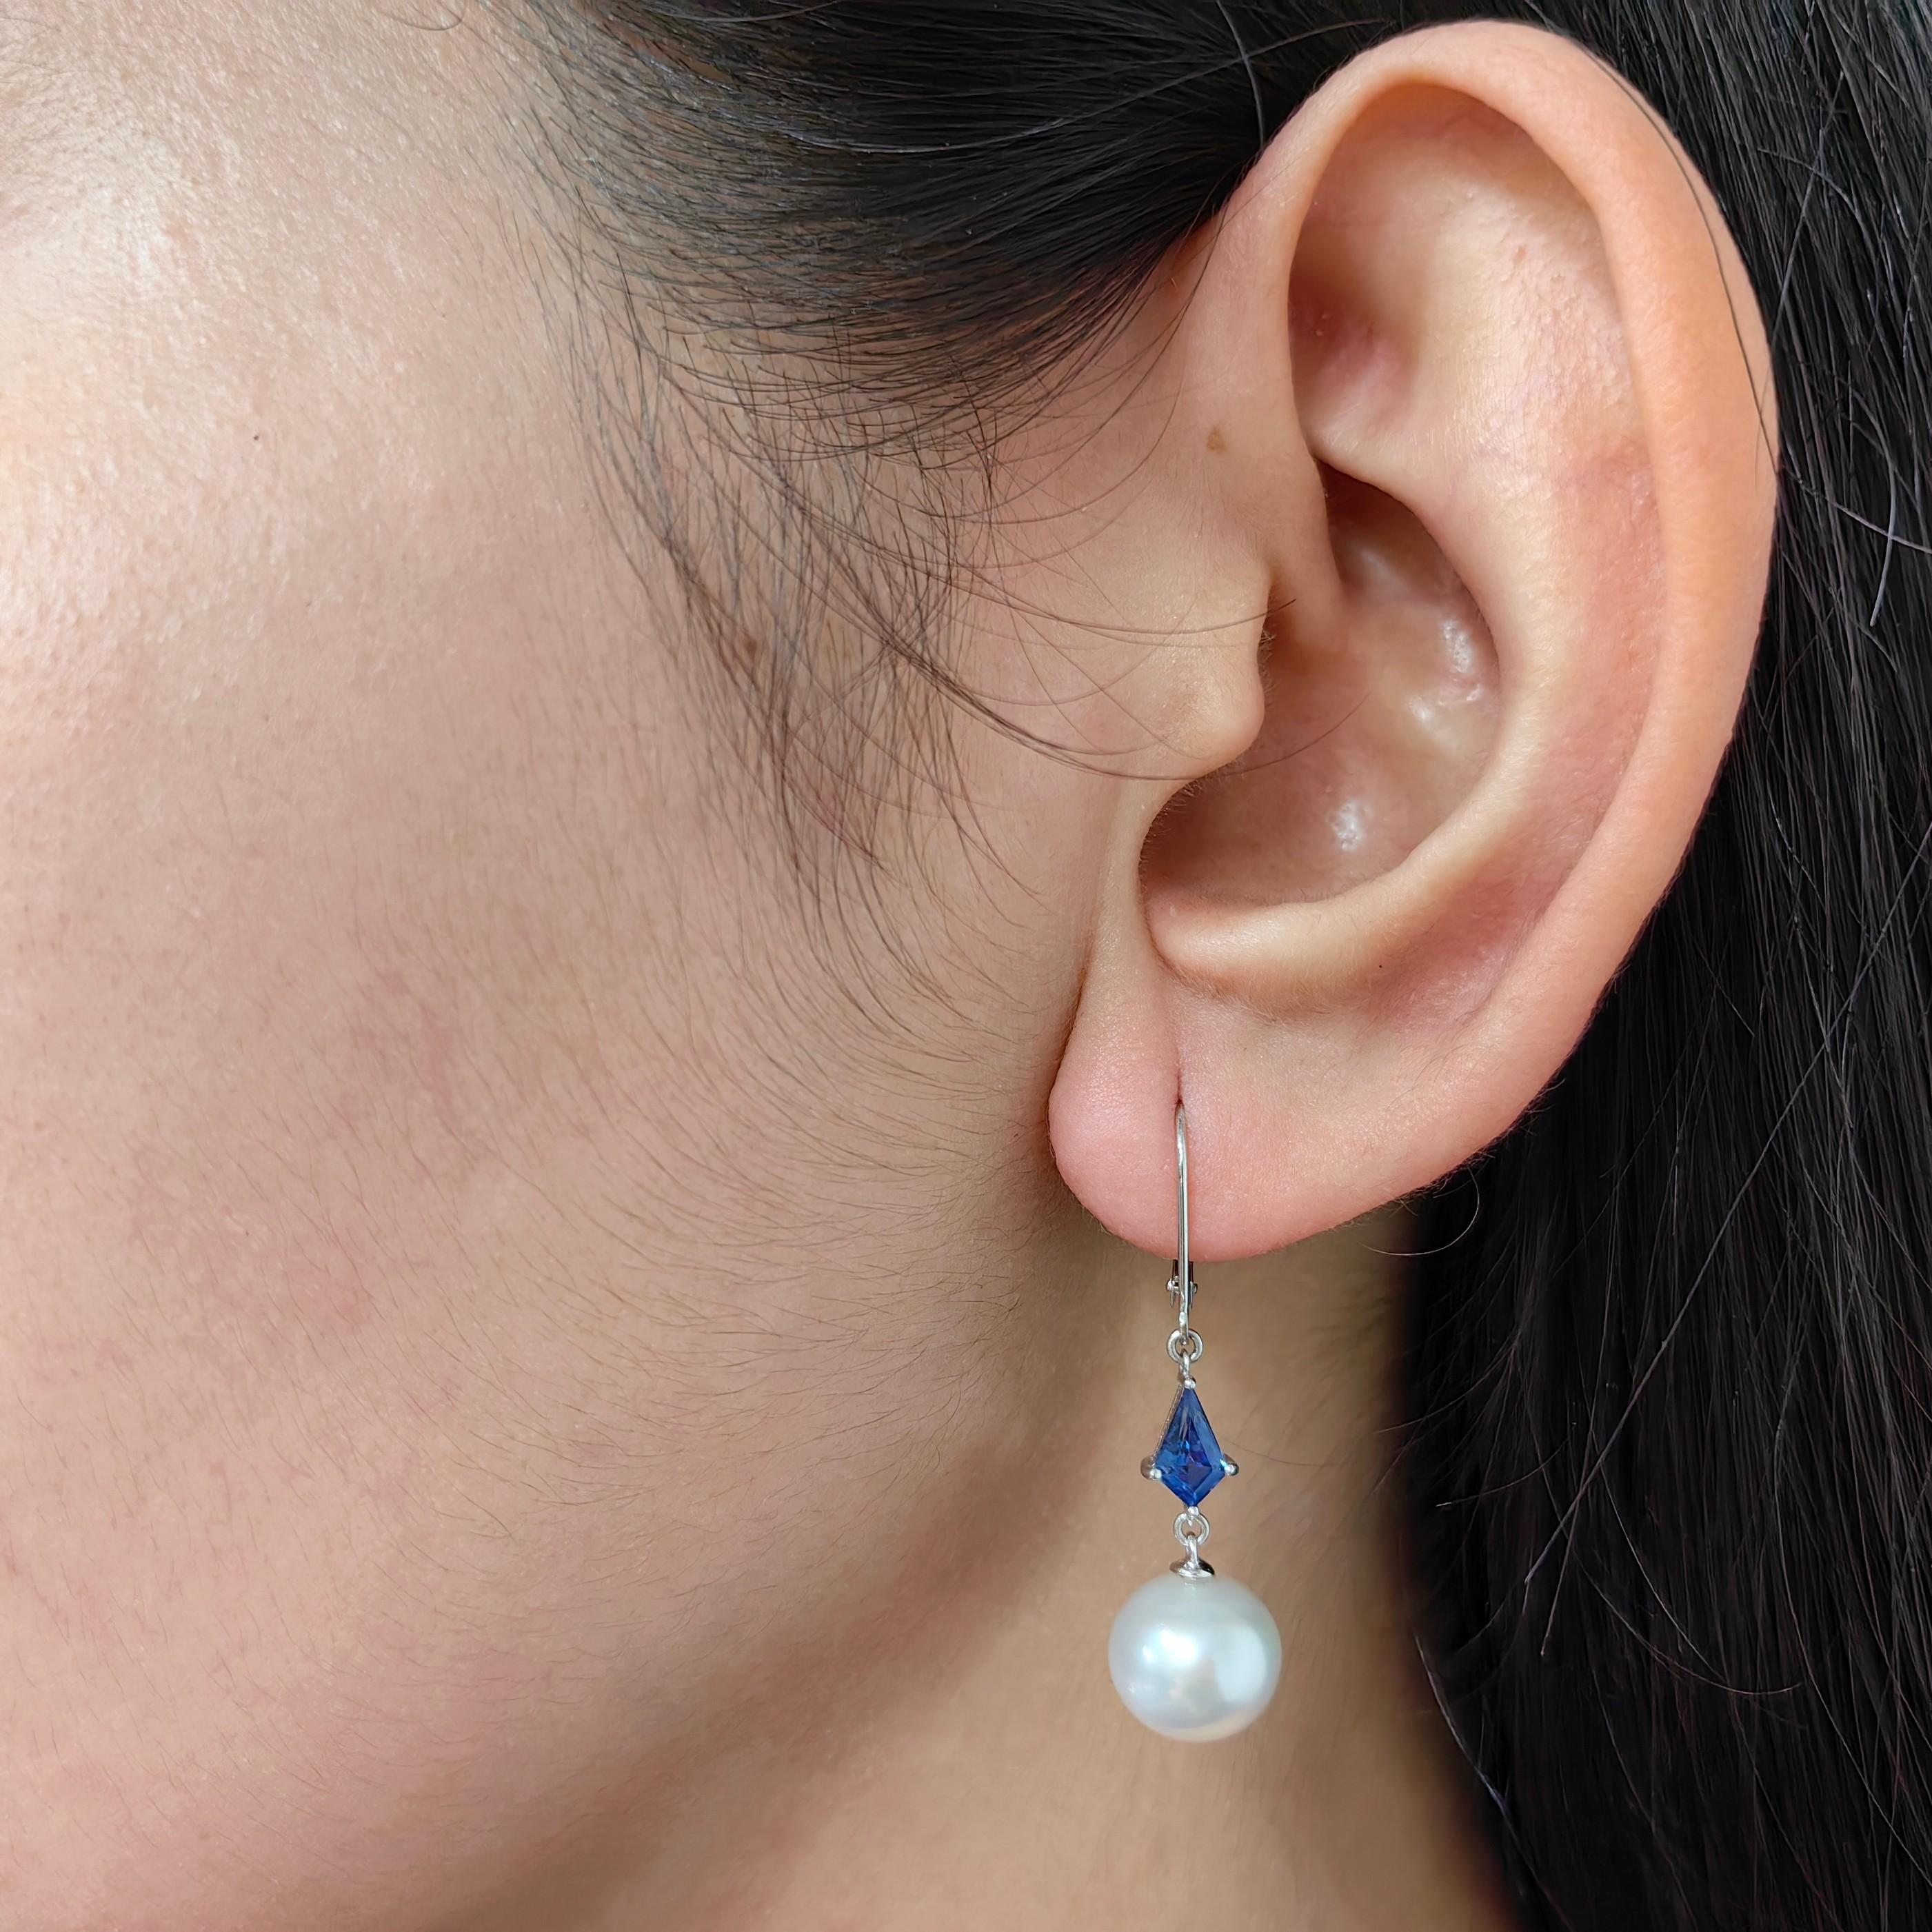 10mm Natural Pearl & Kite Cut Blue Sapphire Dangling Earrings in 18K White Gold For Sale 4